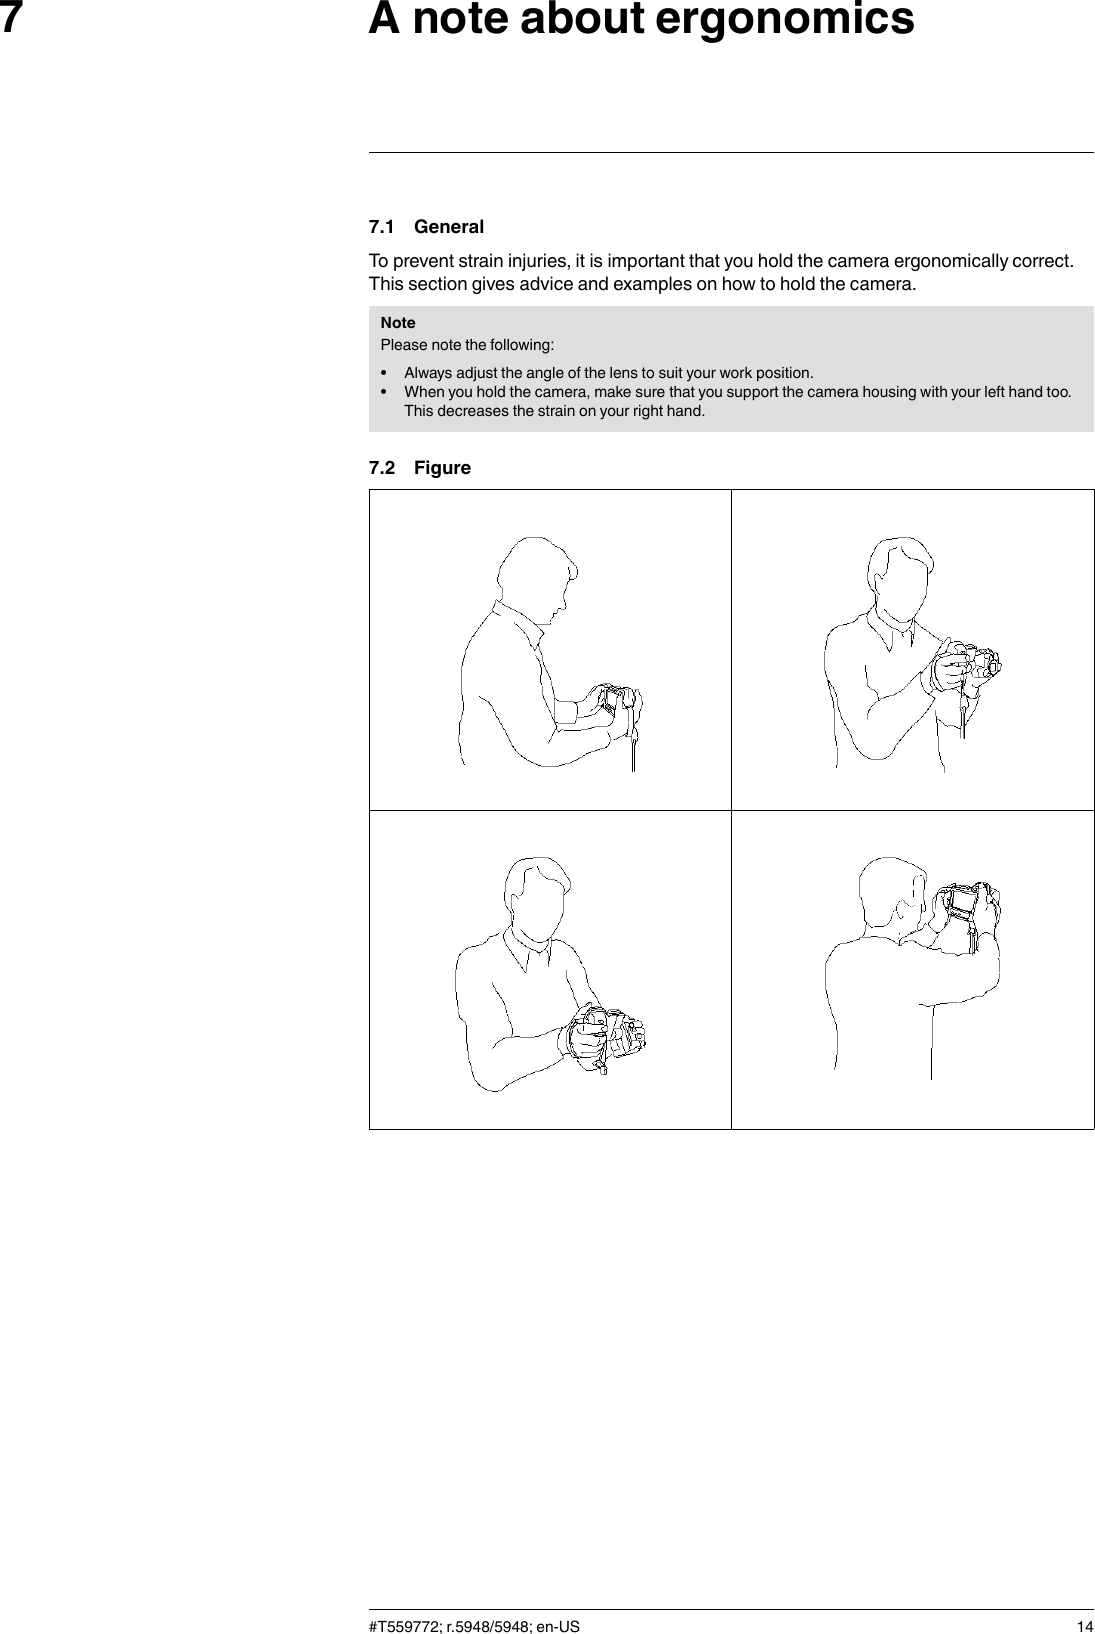 A note about ergonomics77.1 GeneralTo prevent strain injuries, it is important that you hold the camera ergonomically correct.This section gives advice and examples on how to hold the camera.NotePlease note the following:• Always adjust the angle of the lens to suit your work position.• When you hold the camera, make sure that you support the camera housing with your left hand too.This decreases the strain on your right hand.7.2 Figure#T559772; r.5948/5948; en-US 14